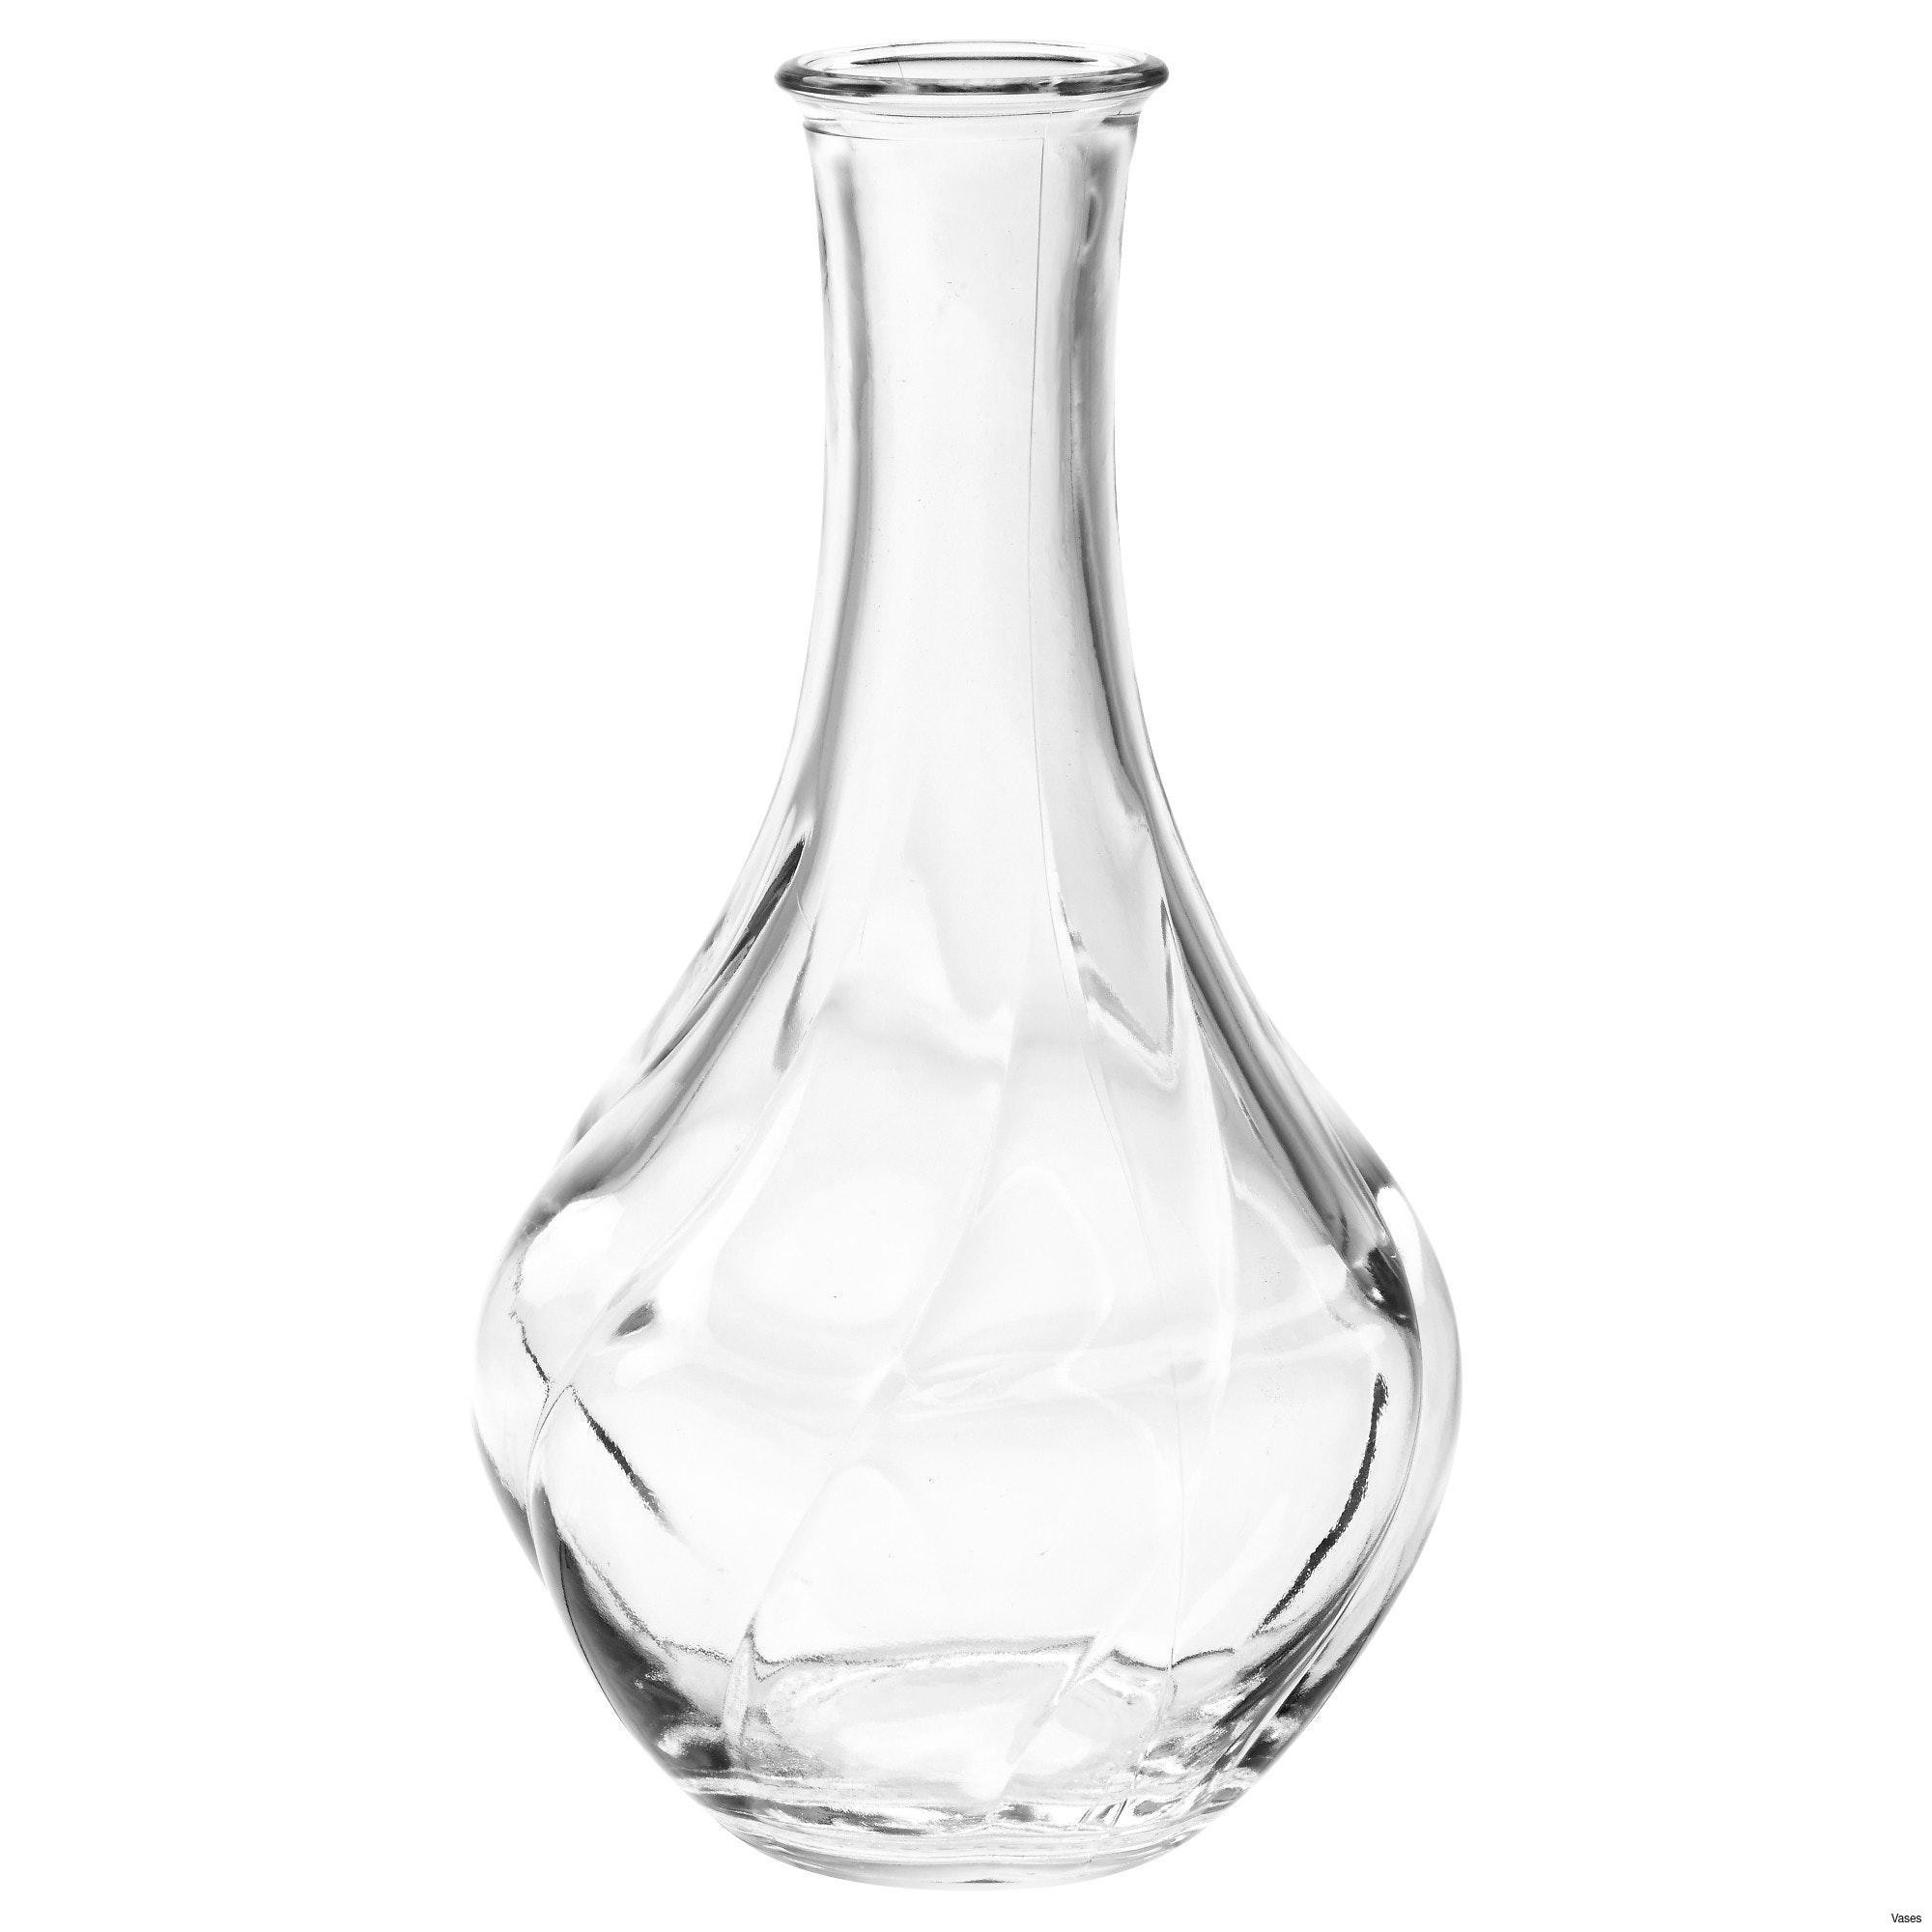 19 Ideal 24 Inch Tall Glass Vases 2024 free download 24 inch tall glass vases of large glass vases gallery living room glass vases fresh clear vase in large glass vases gallery living room glass vases fresh clear vase 0d tags amazing and of